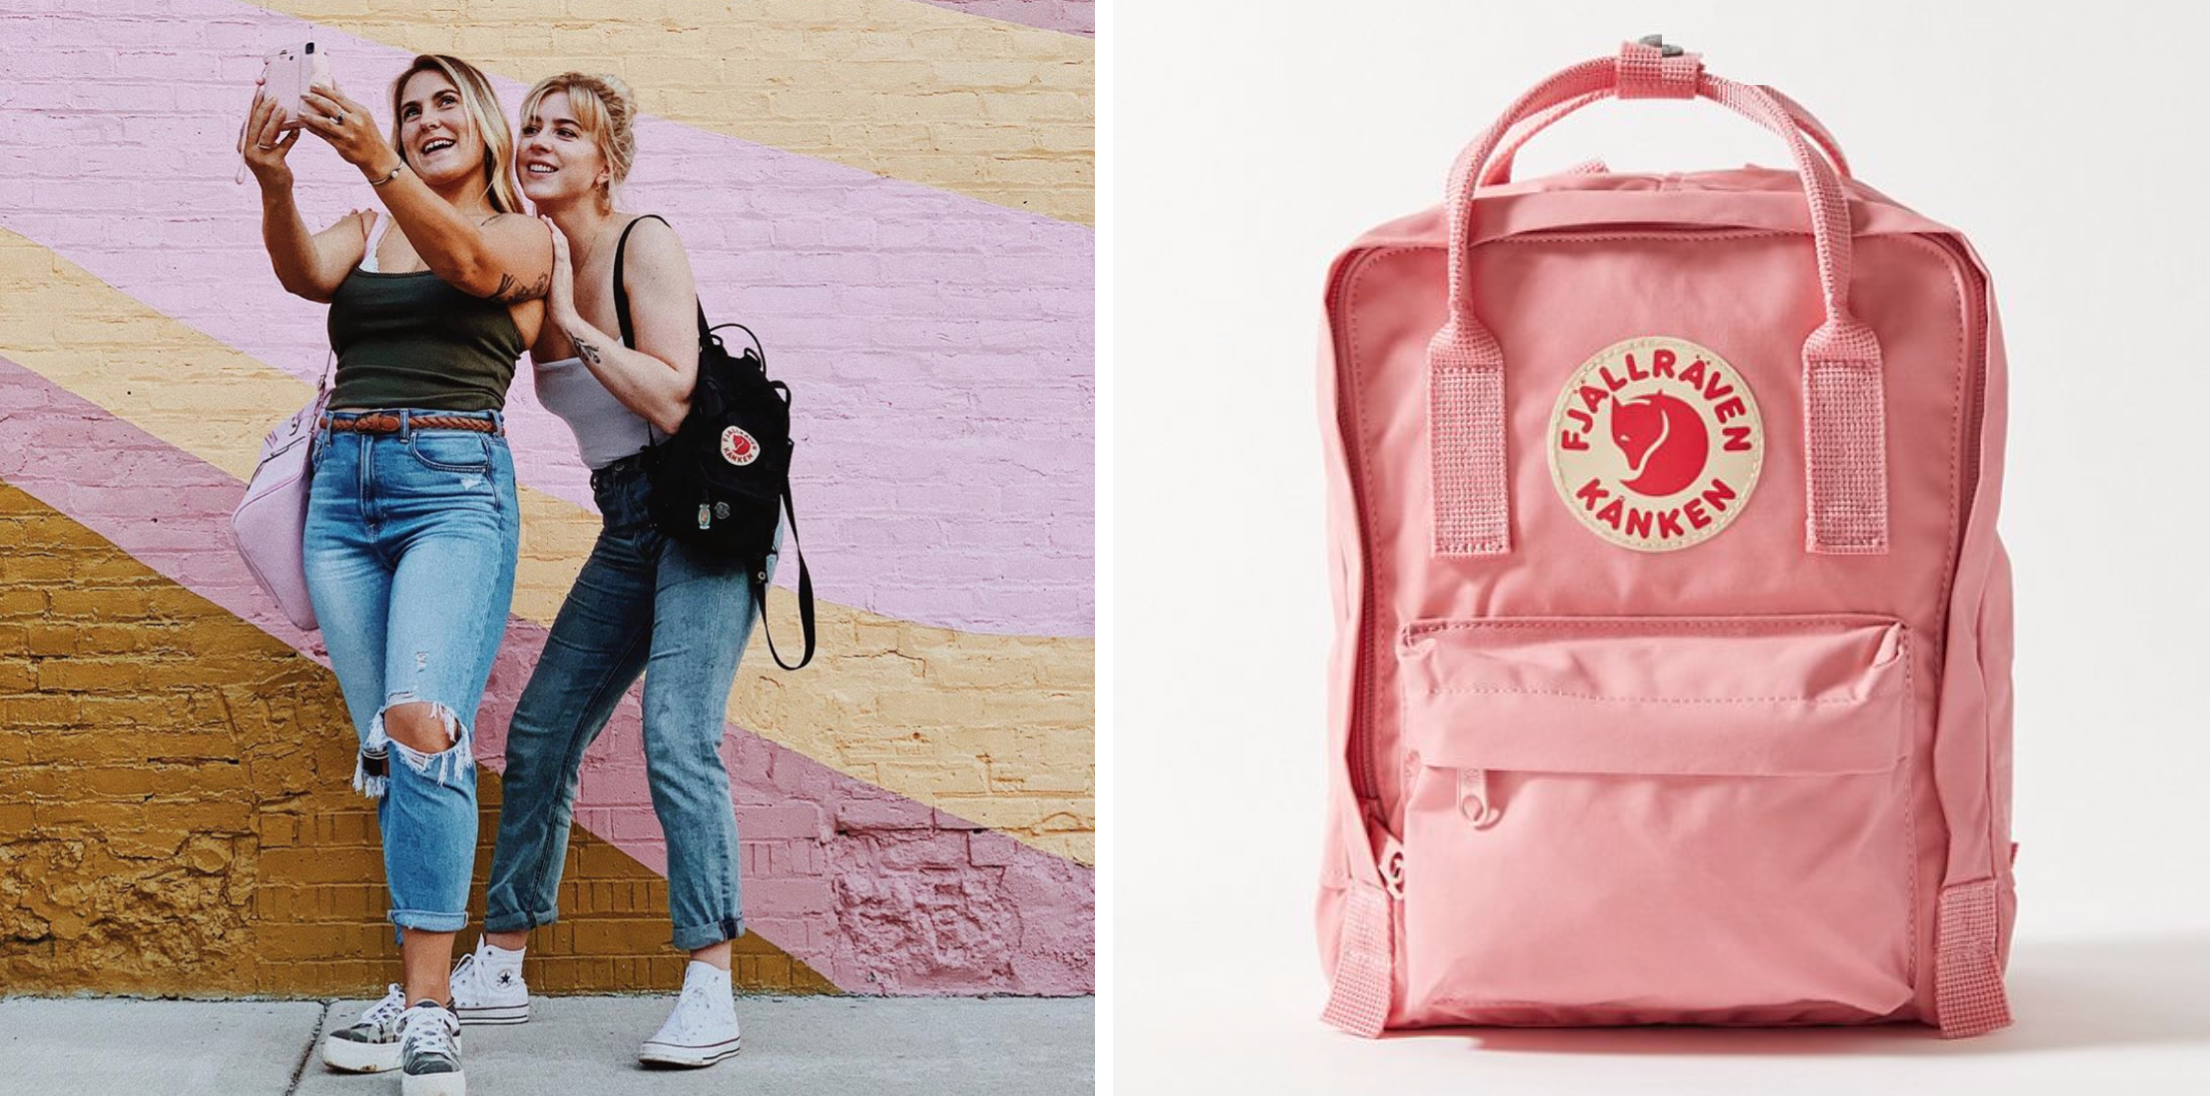 Make life library is there Where to Buy the VSCO Girl Backpack – Shop Fjallraven Kanken Bags